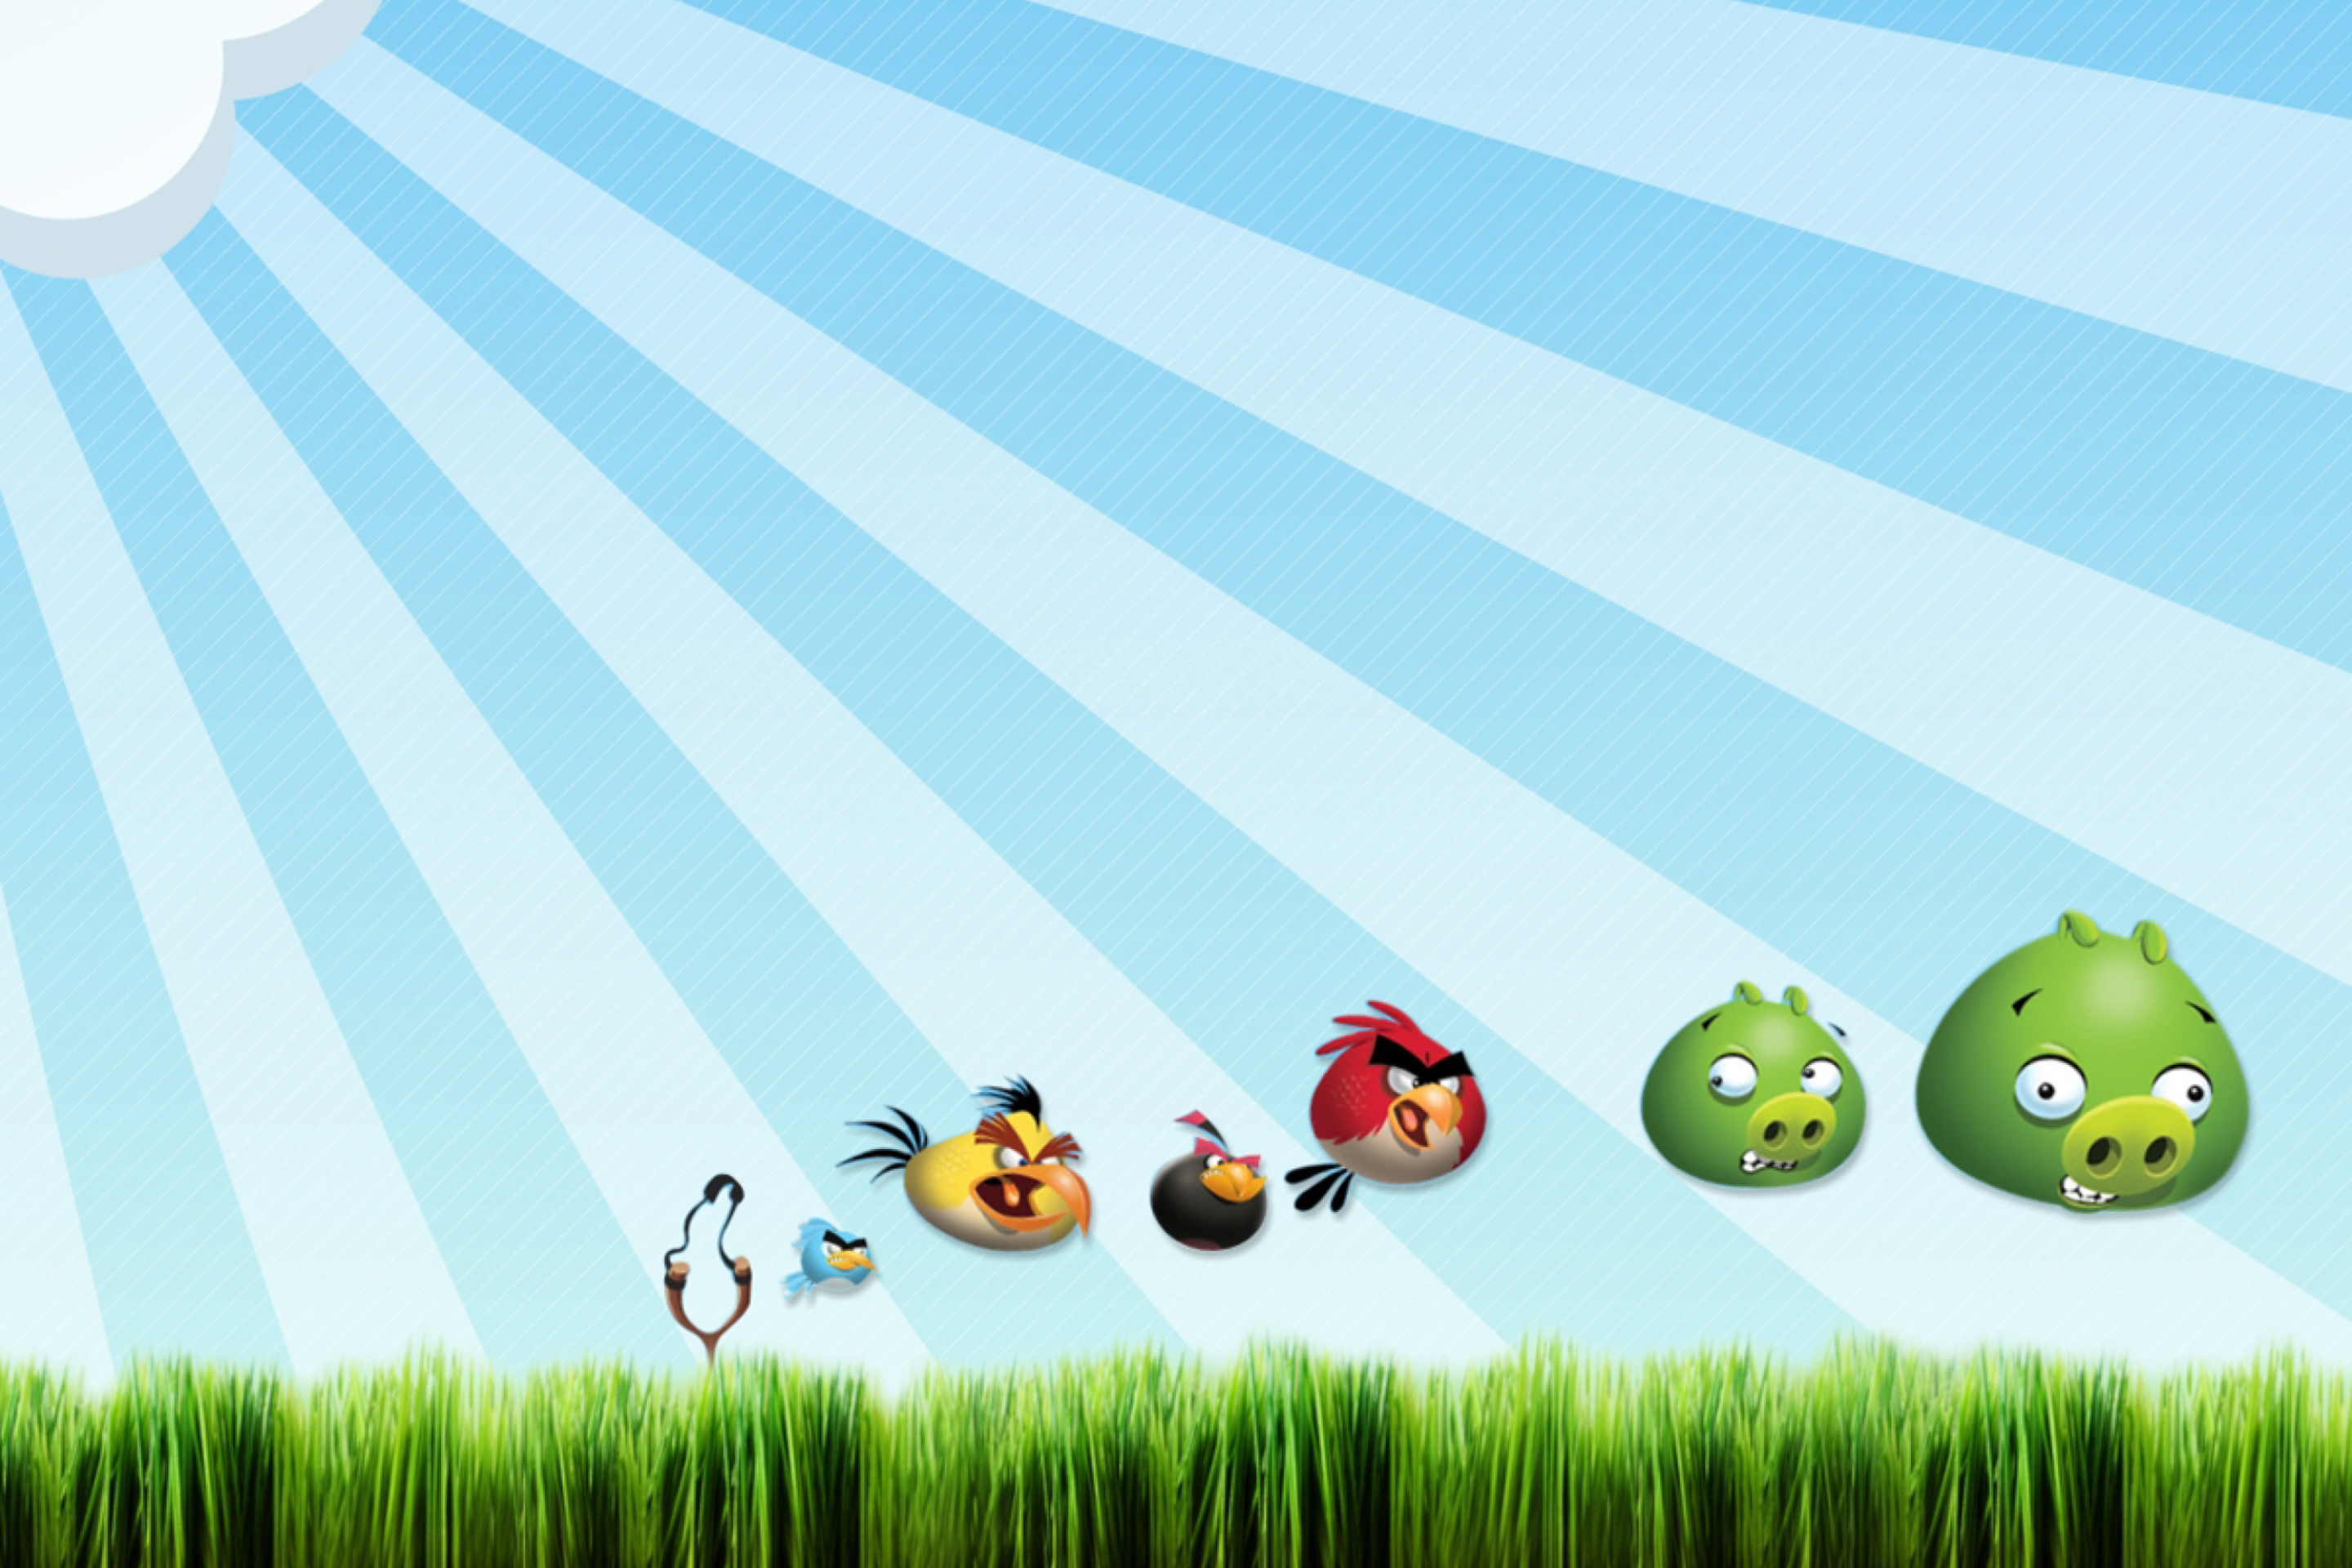 Angry Birds Bad Pigs wallpaper 2880x1920